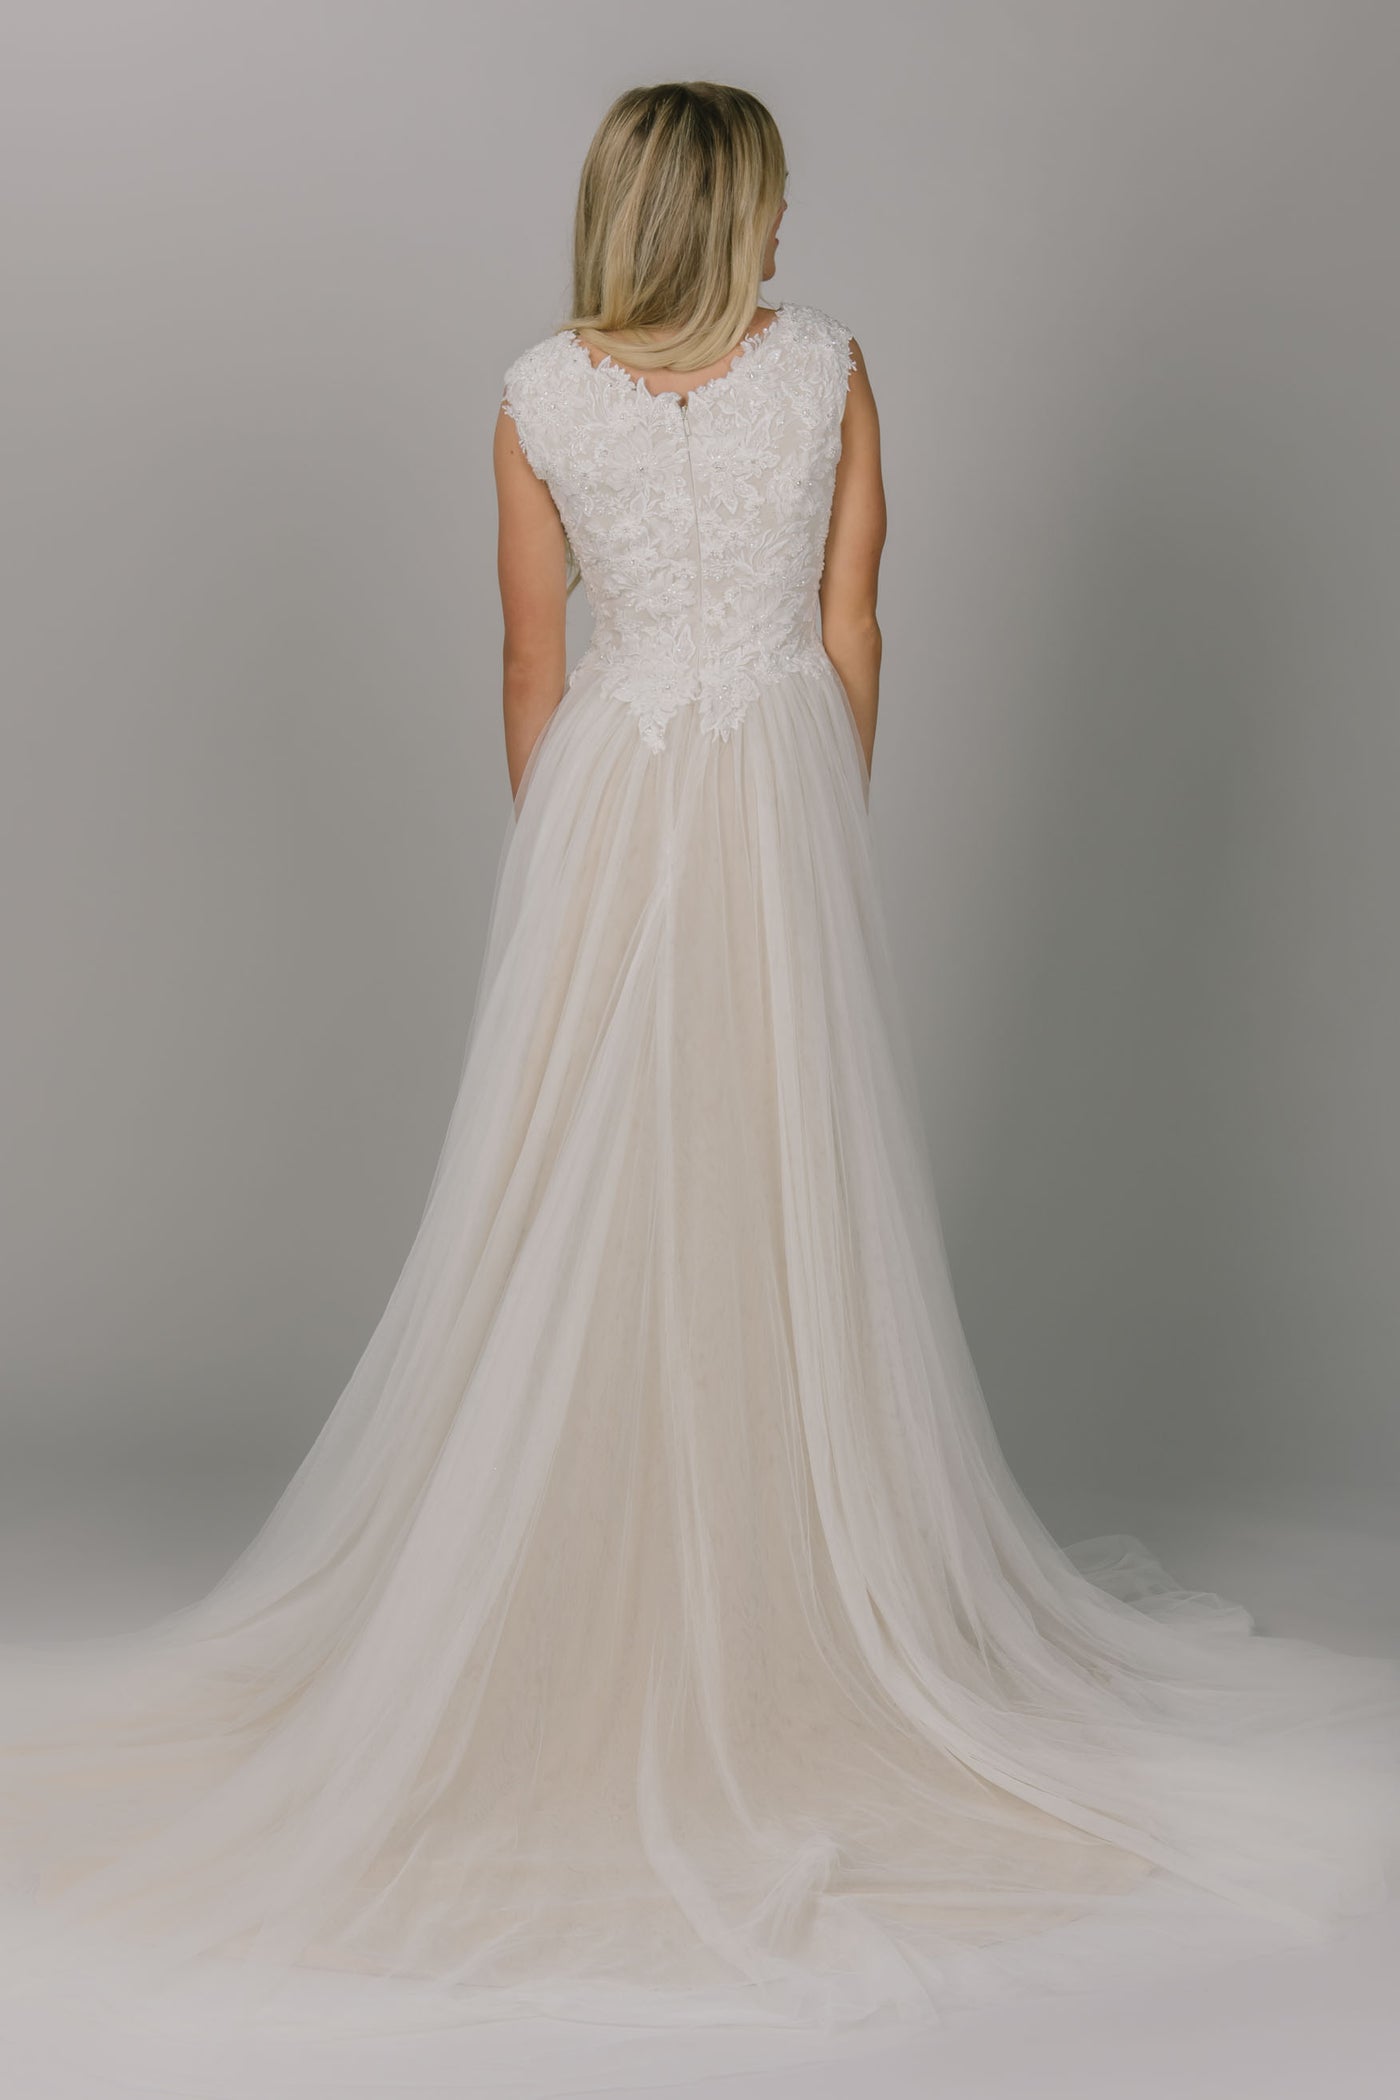 A-line modest wedding dress. It has a scoop neckline and cap sleeves. The top has lace and beaded detailing. The skirt is tulle with a champagne underlay.